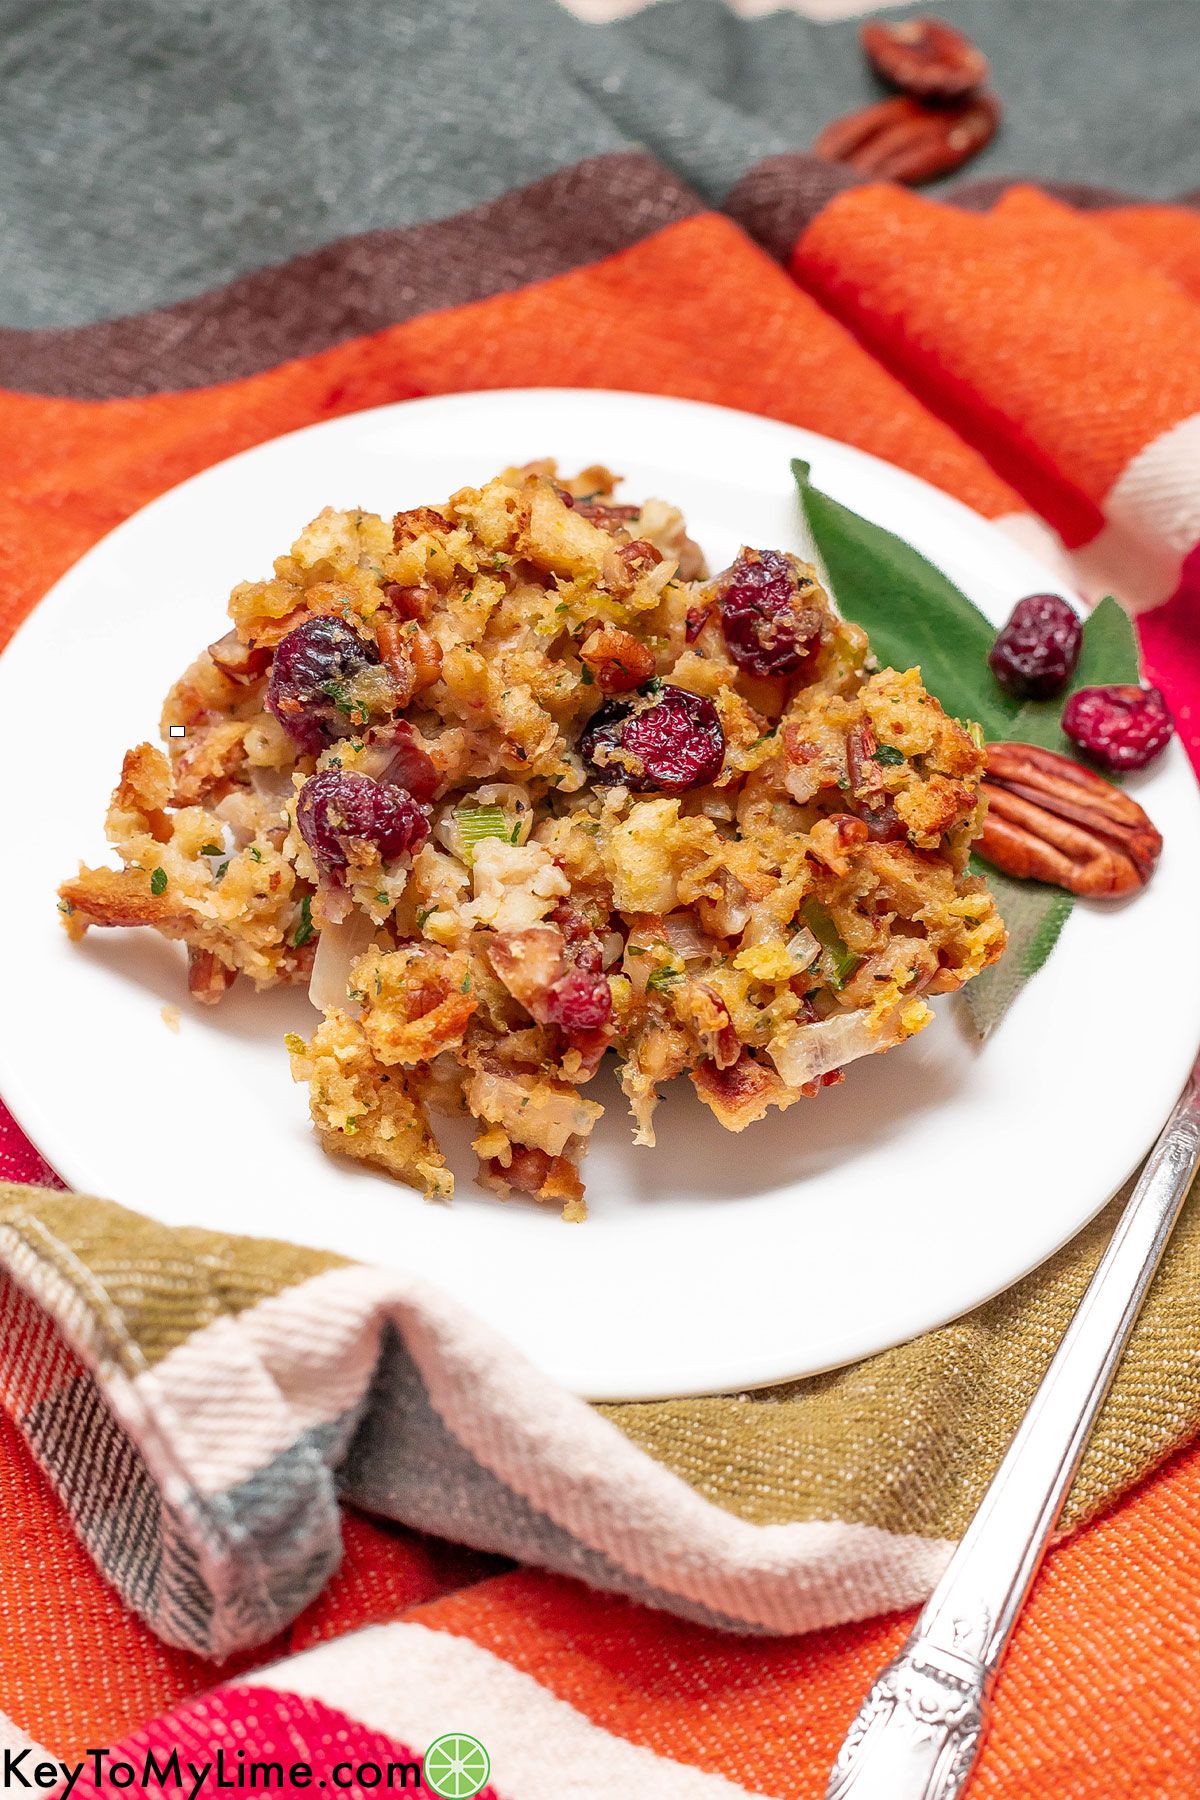 A serving of baked stove top stuffing on a plate garnished with safe, cranberries, and pecans.